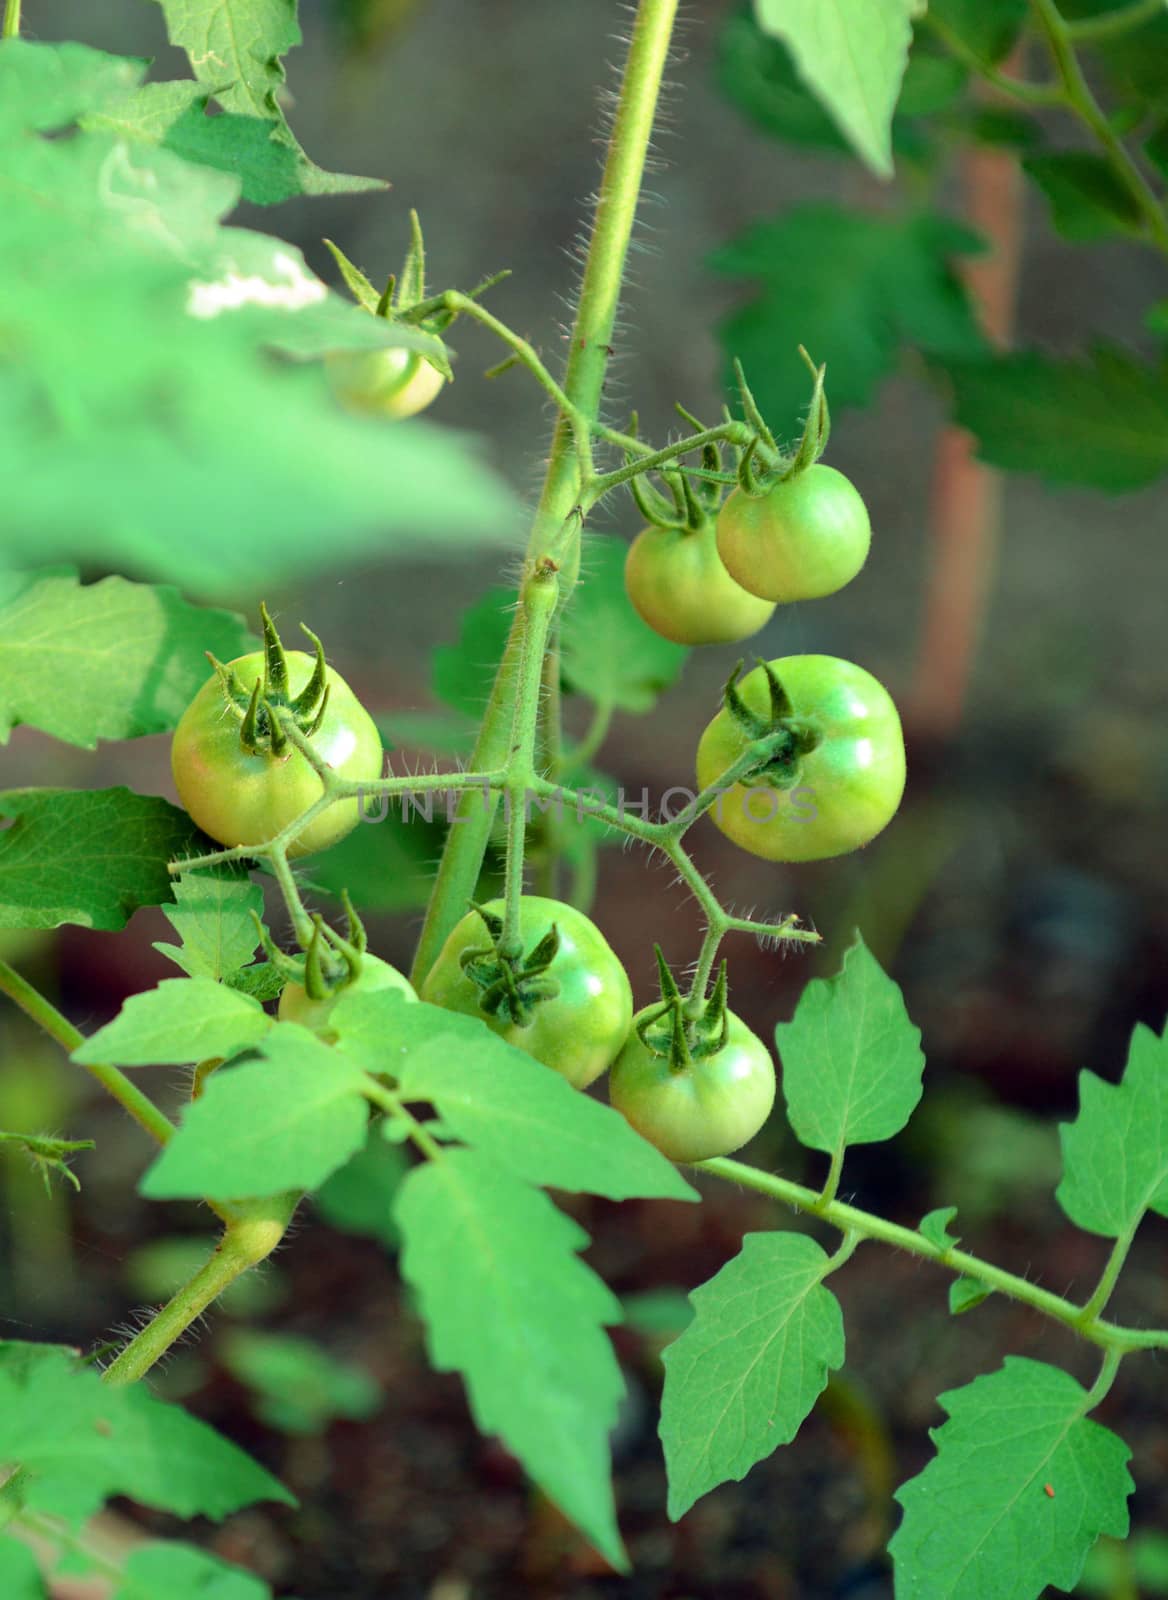 green tomatoes growing on a vine in the garden